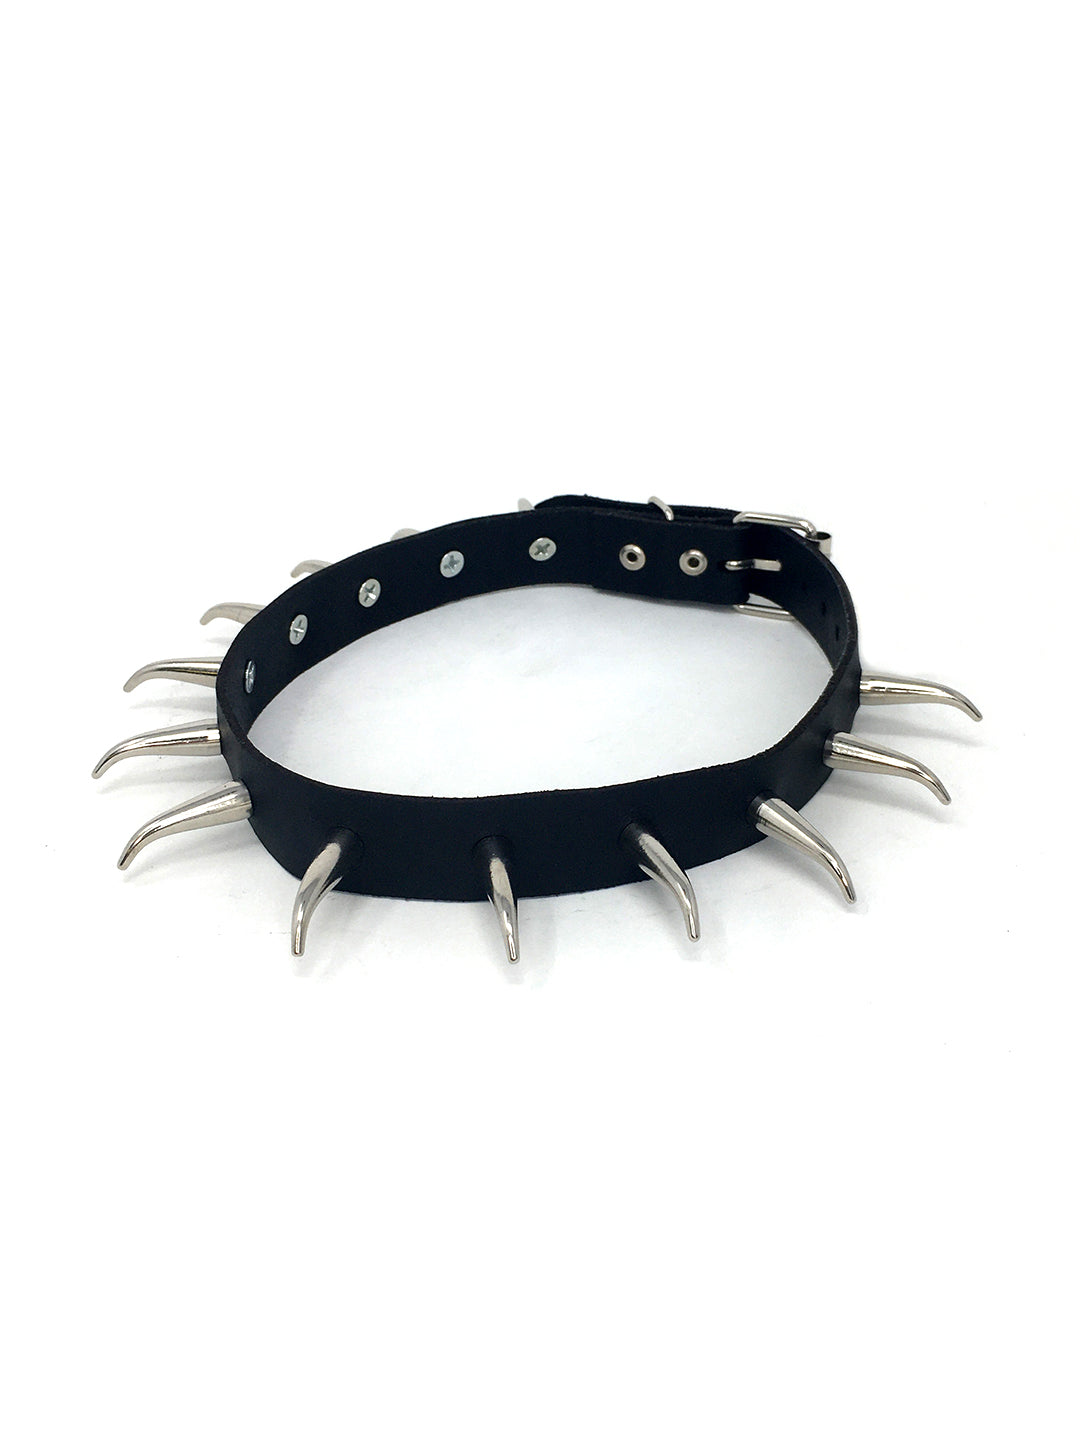 Leather Collar with Bent Cone Spikes